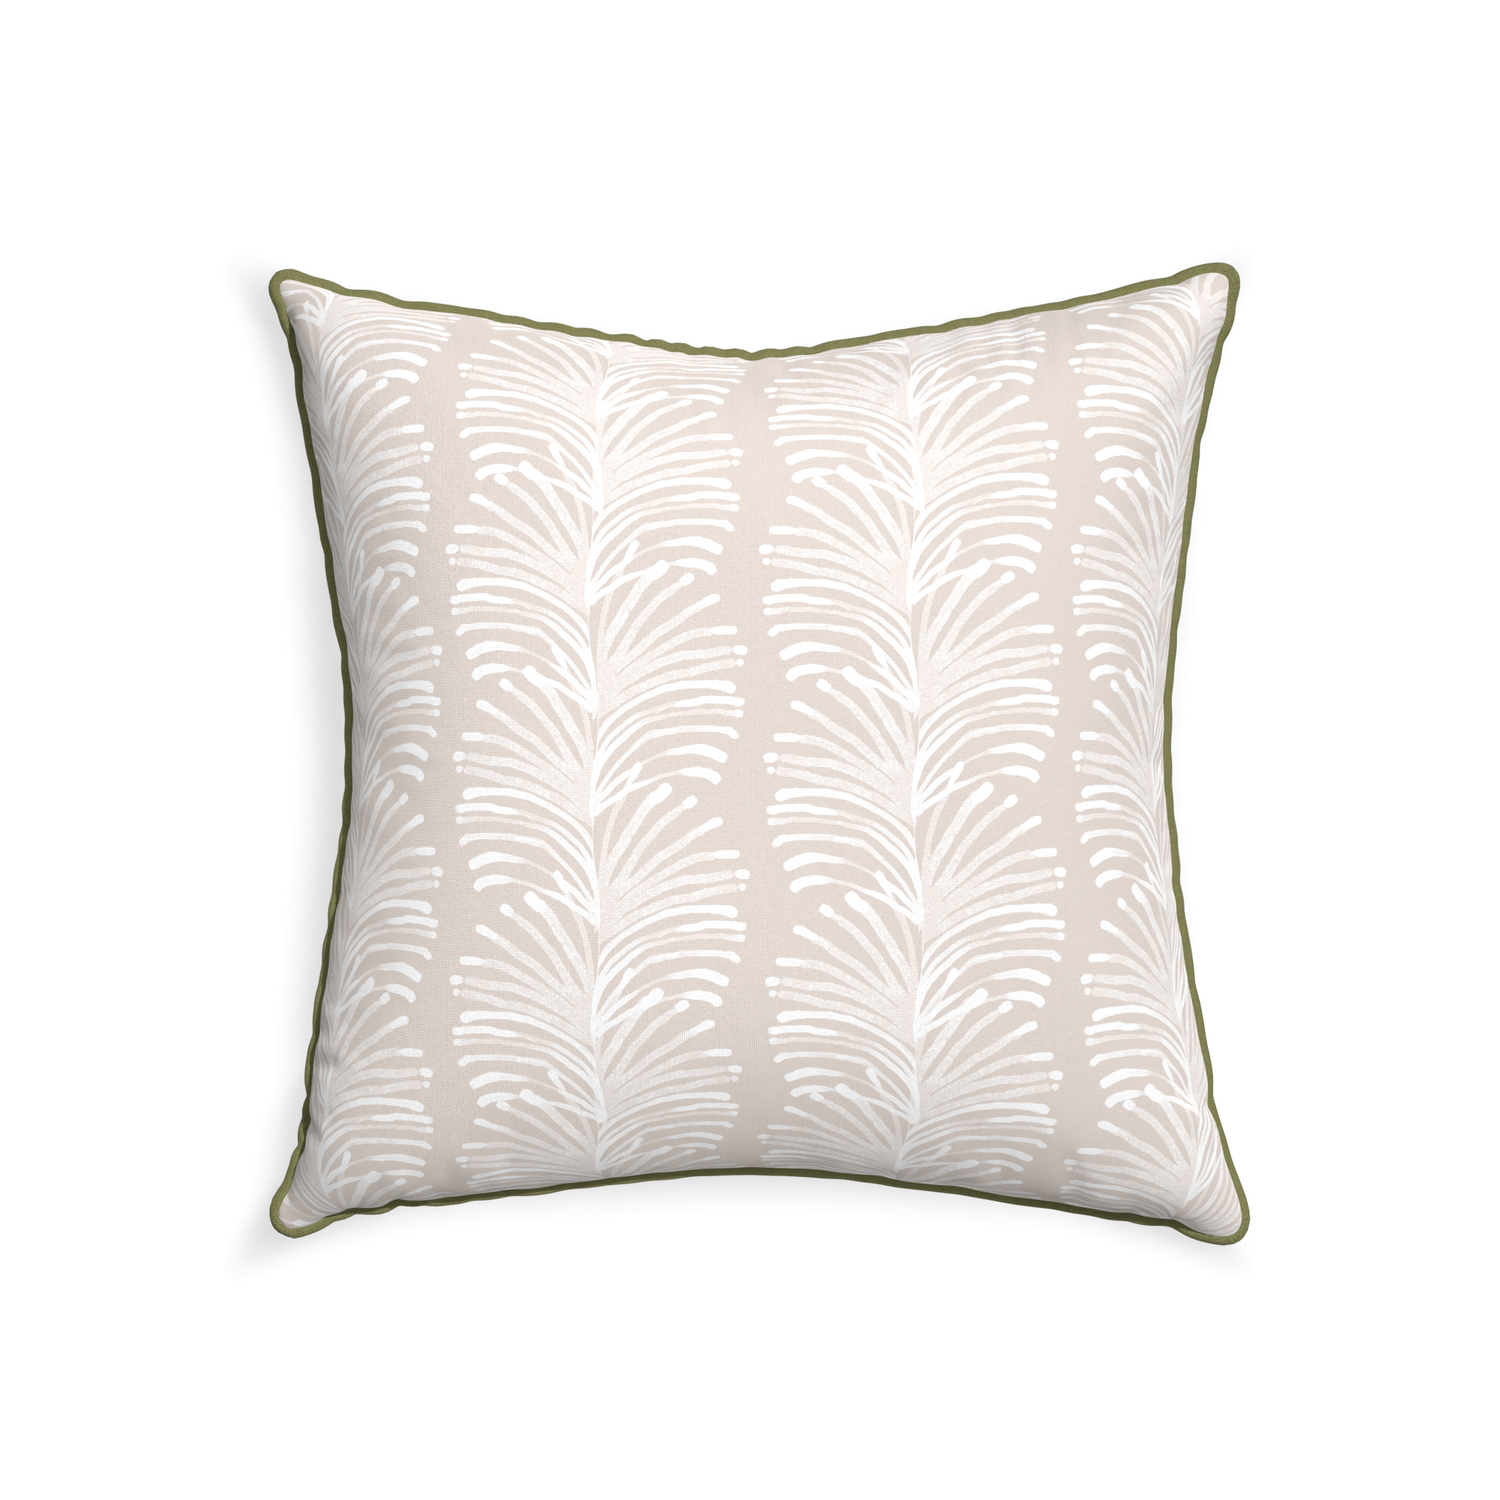 22-square emma sand custom pillow with moss piping on white background